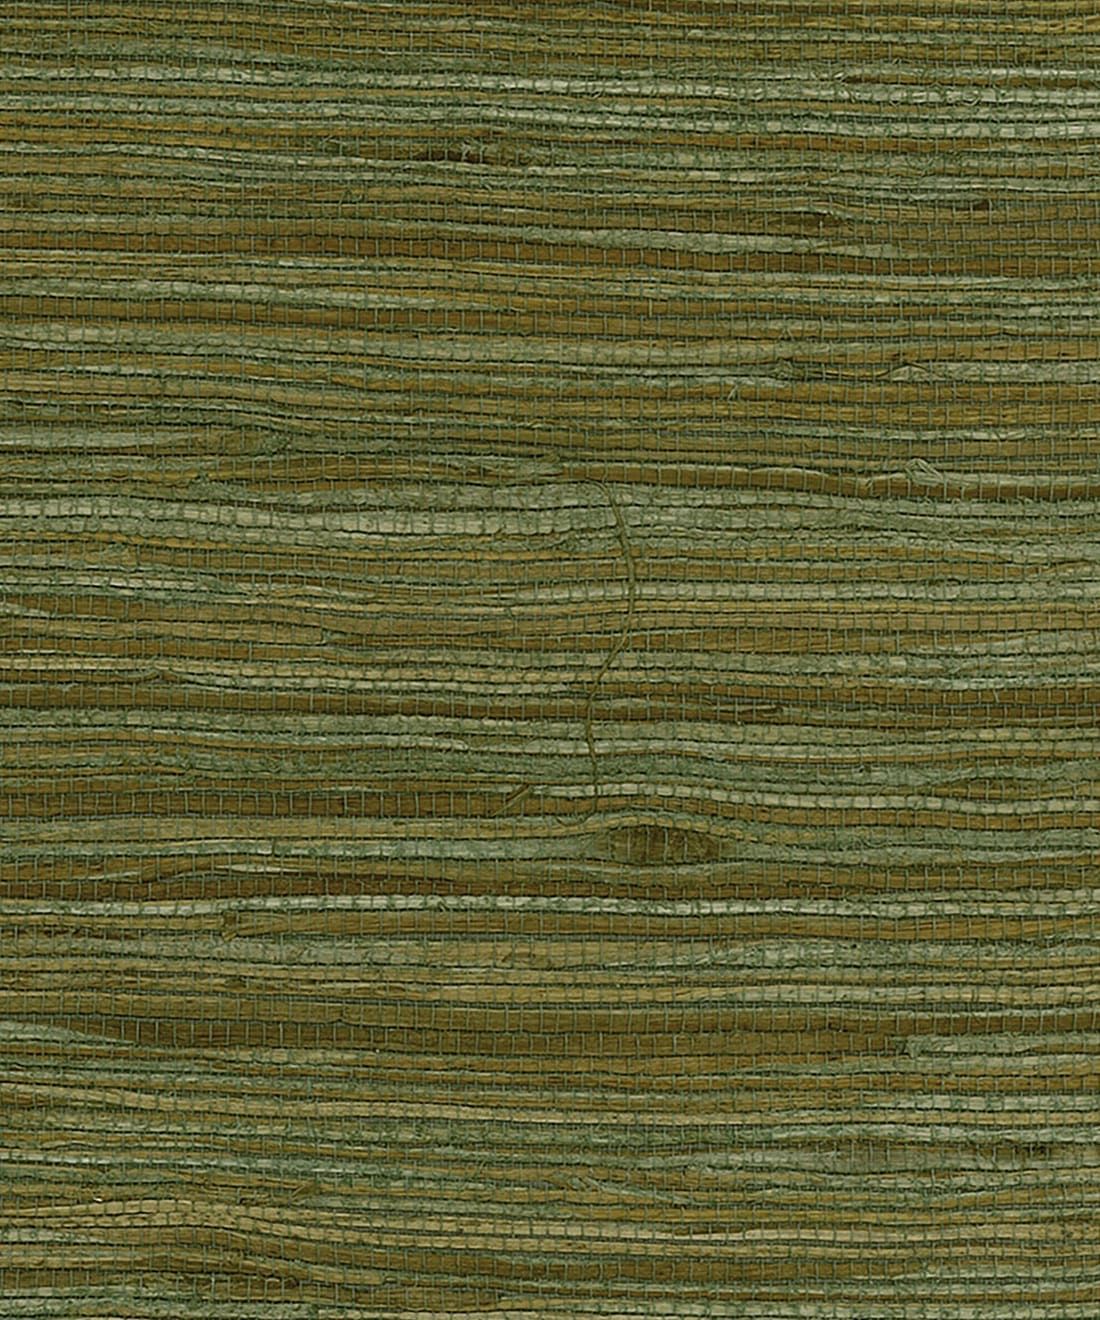 Water Hyacinth Grasscloth Wallpaper - Olive